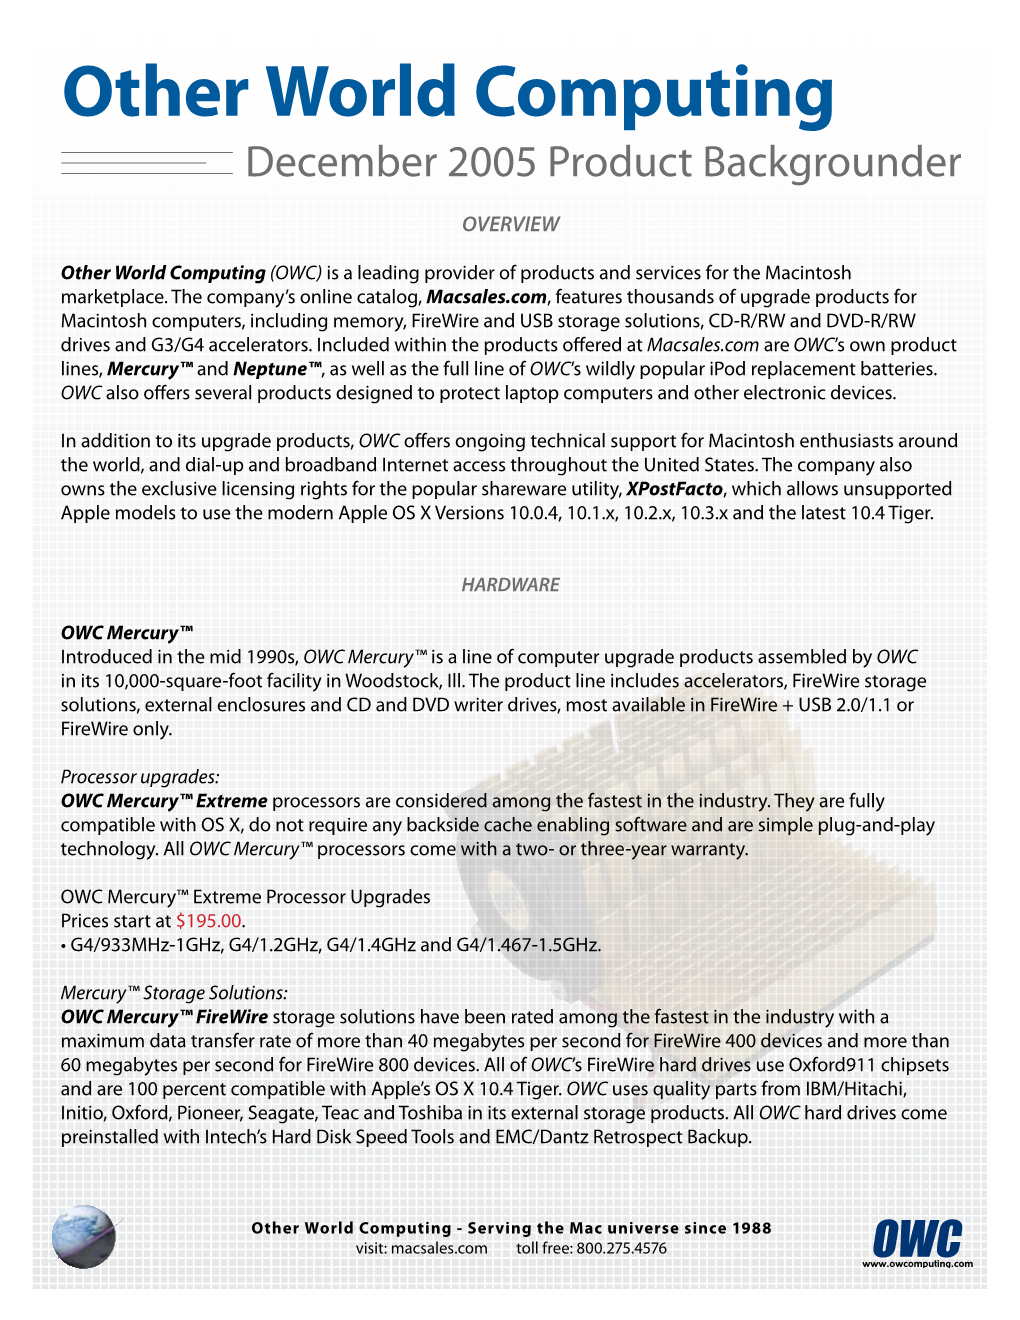 Other World Computing December 2005 Product Backgrounder